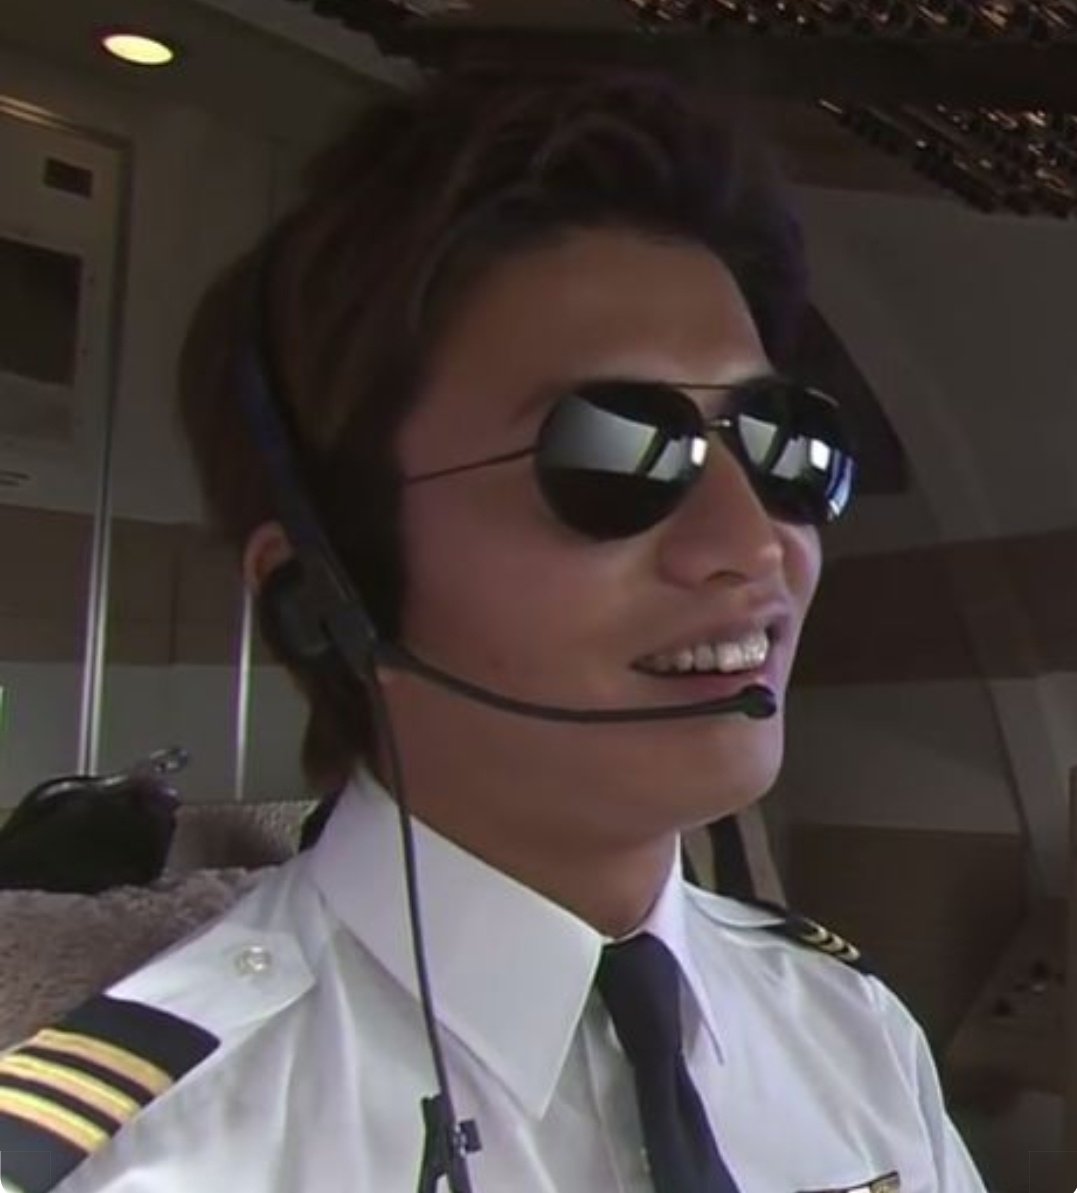 watching the rerun of Kimura Takuya's series, Good Luck on Gem TV now. it brings back a lot of memories. amd Shinkai is one kakkoii pilot. 😍

and ofc it goes without saying my dai ichiban one hella fine actor, among all the other things he can do. 🔥

#TakuyaKimura